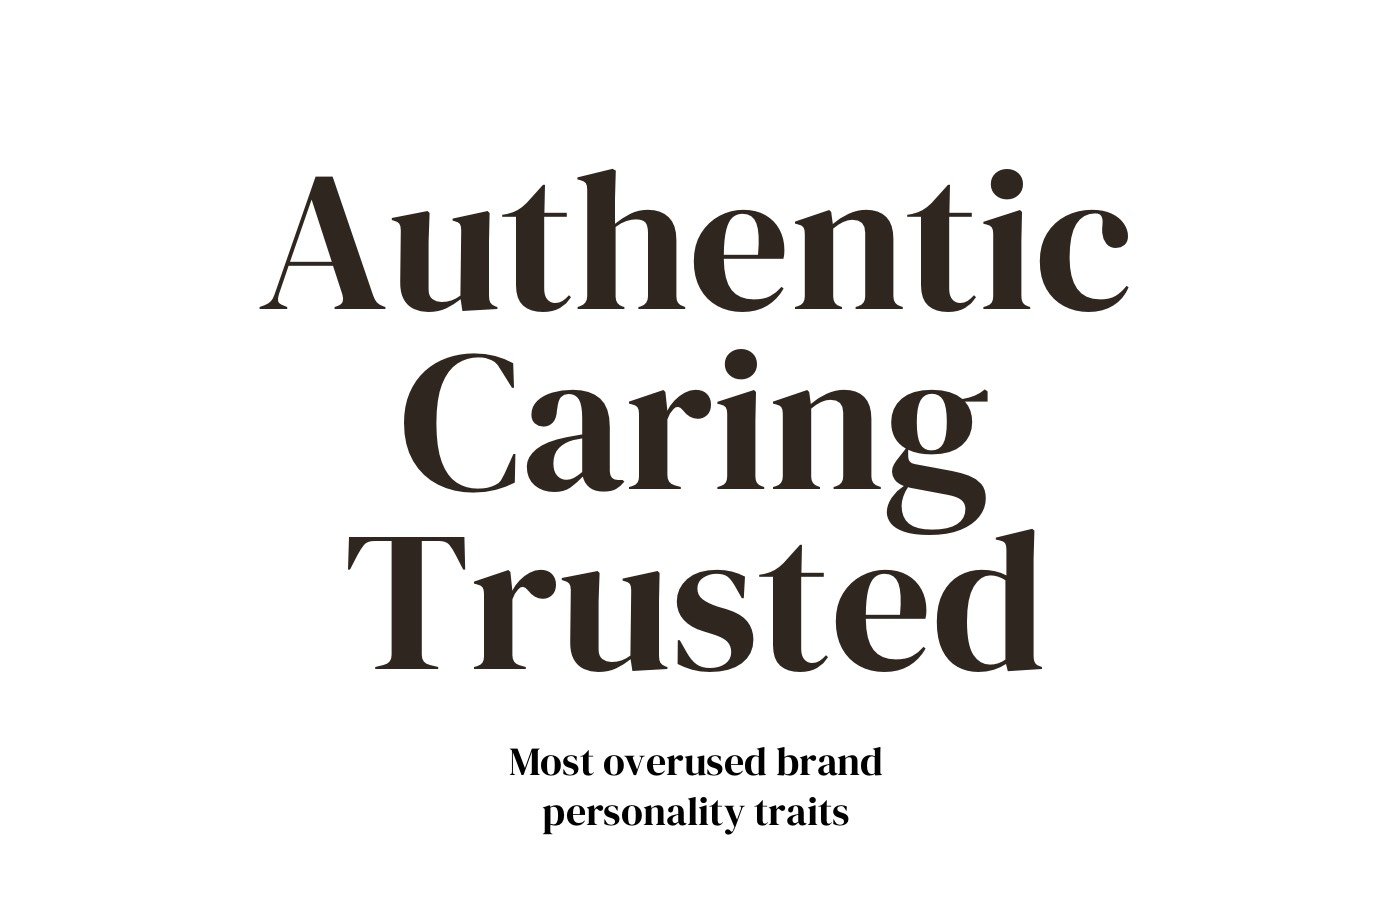 Brand personality traits - Human Brands & Imperfection - Better Known